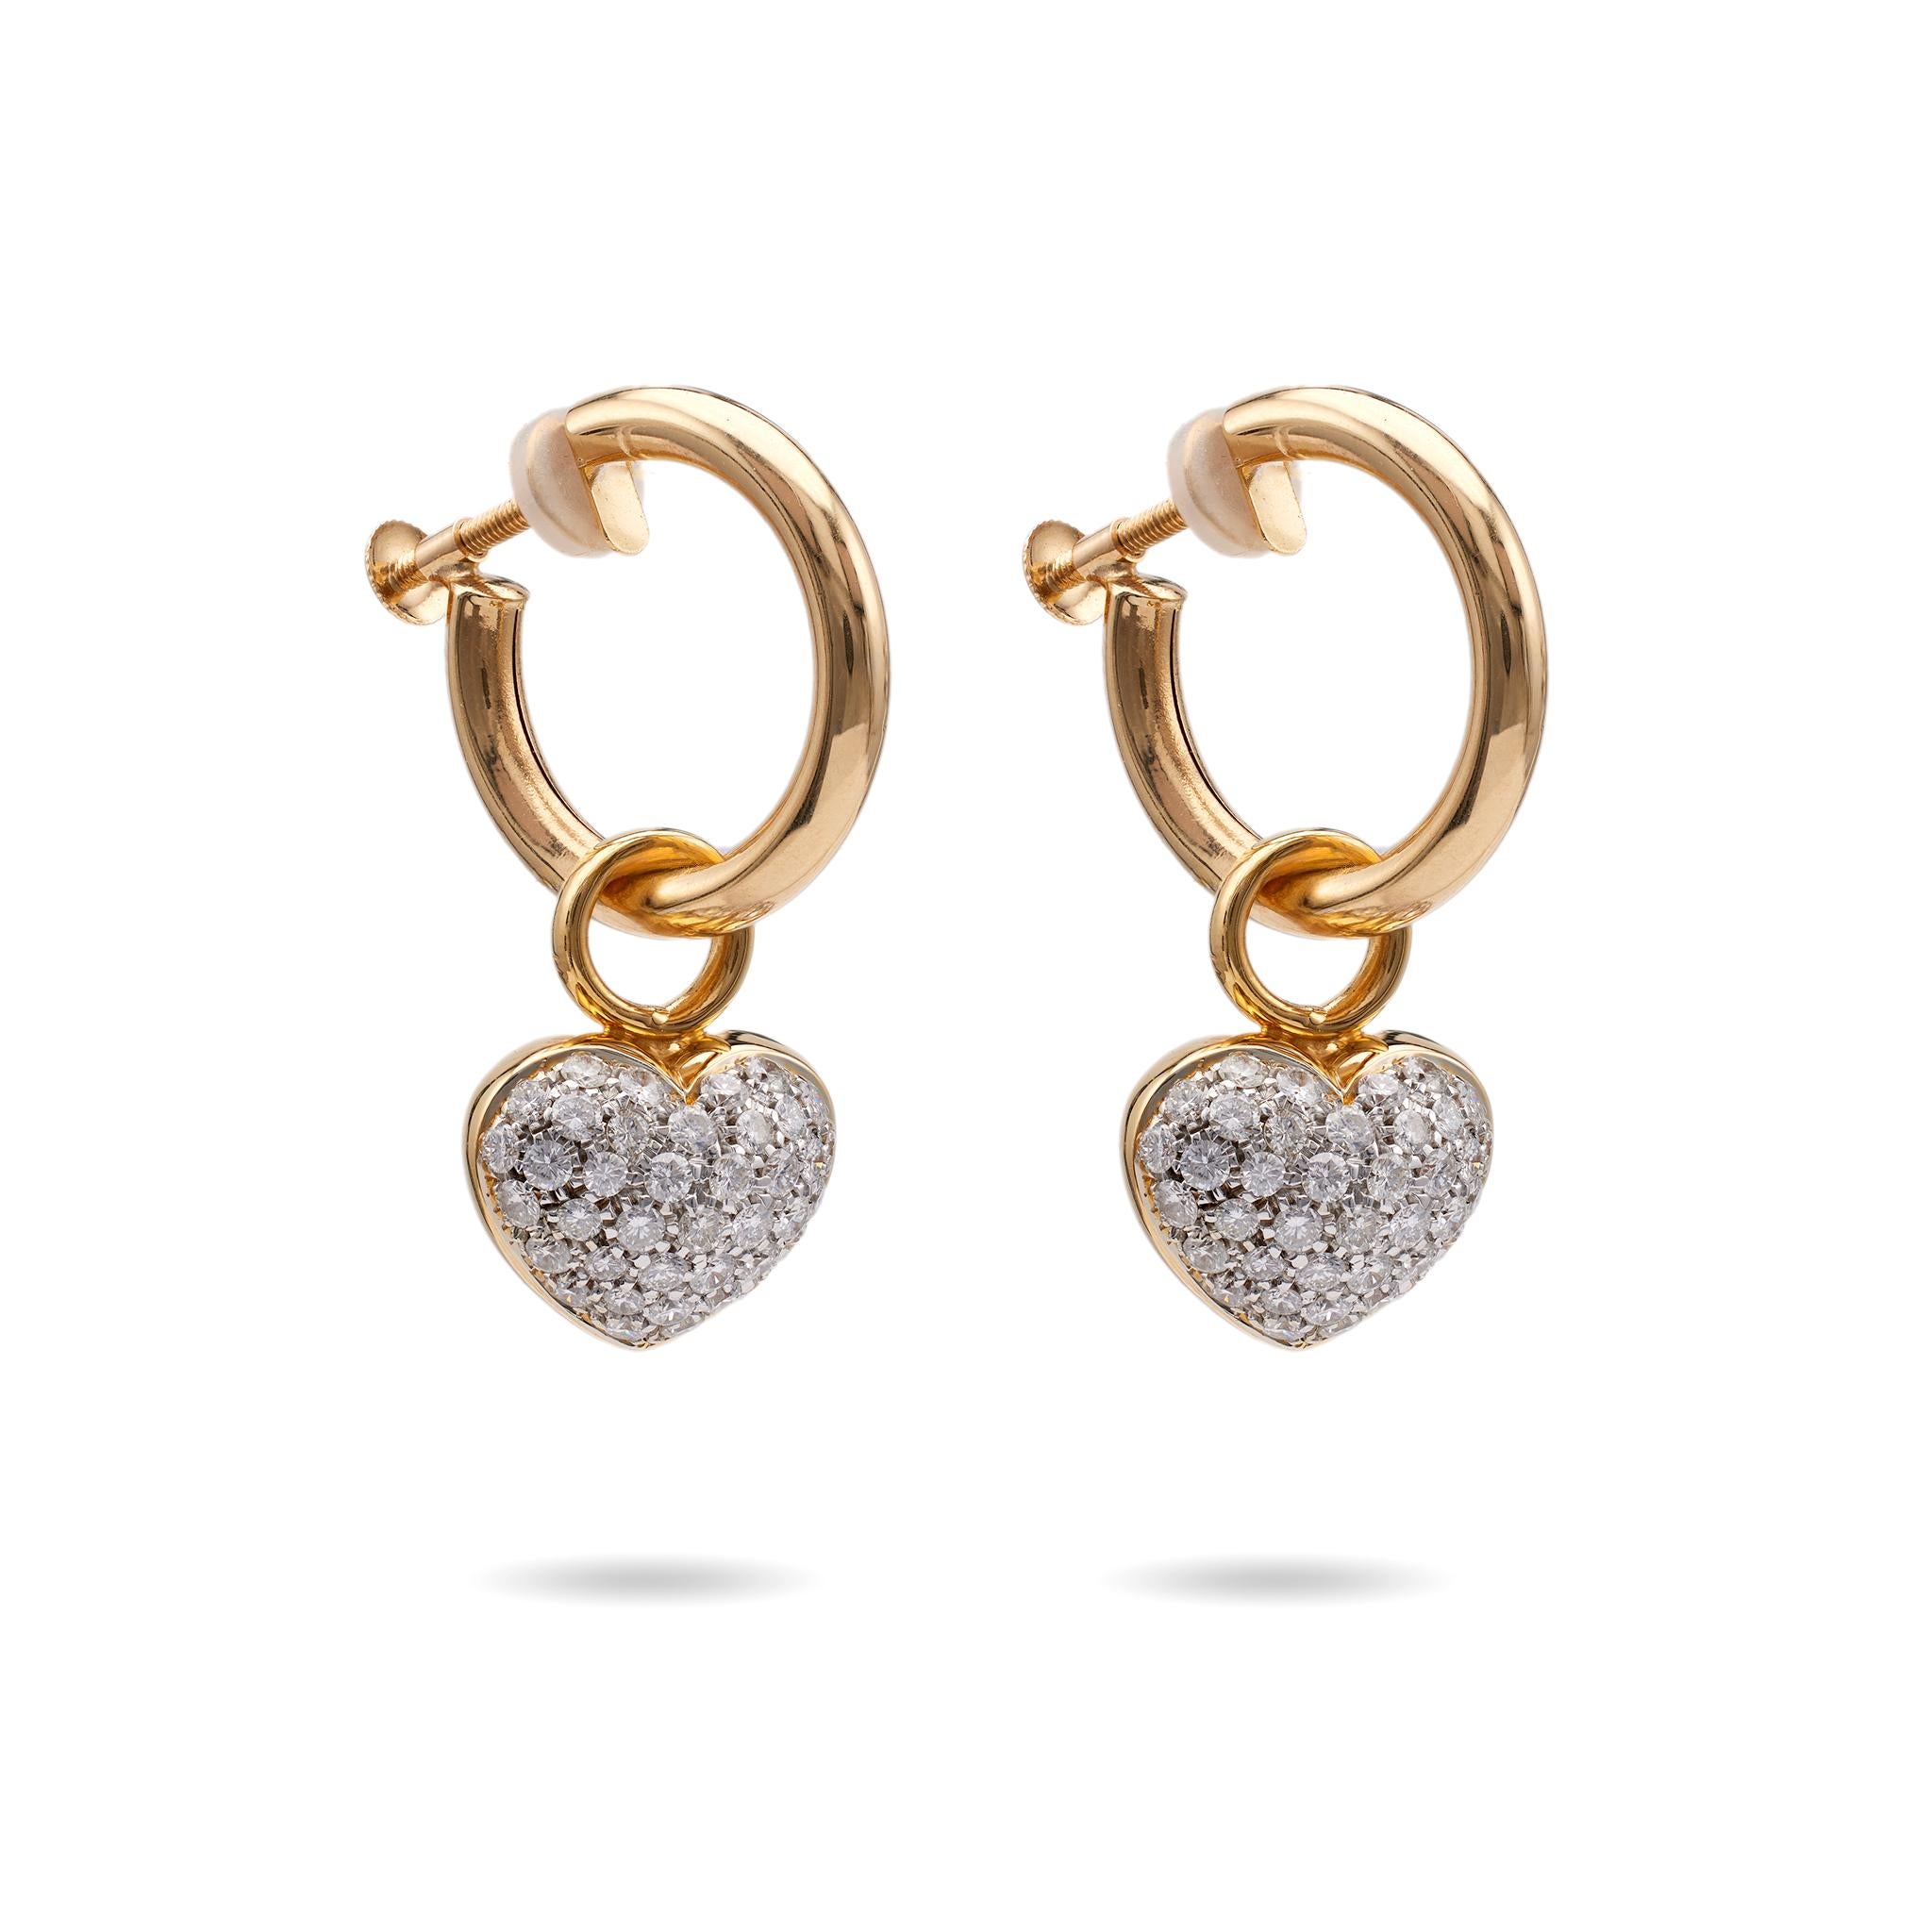 Pair of Vintage Diamond 18k Yellow Gold Heart Drop Earrings In Excellent Condition For Sale In Beverly Hills, CA